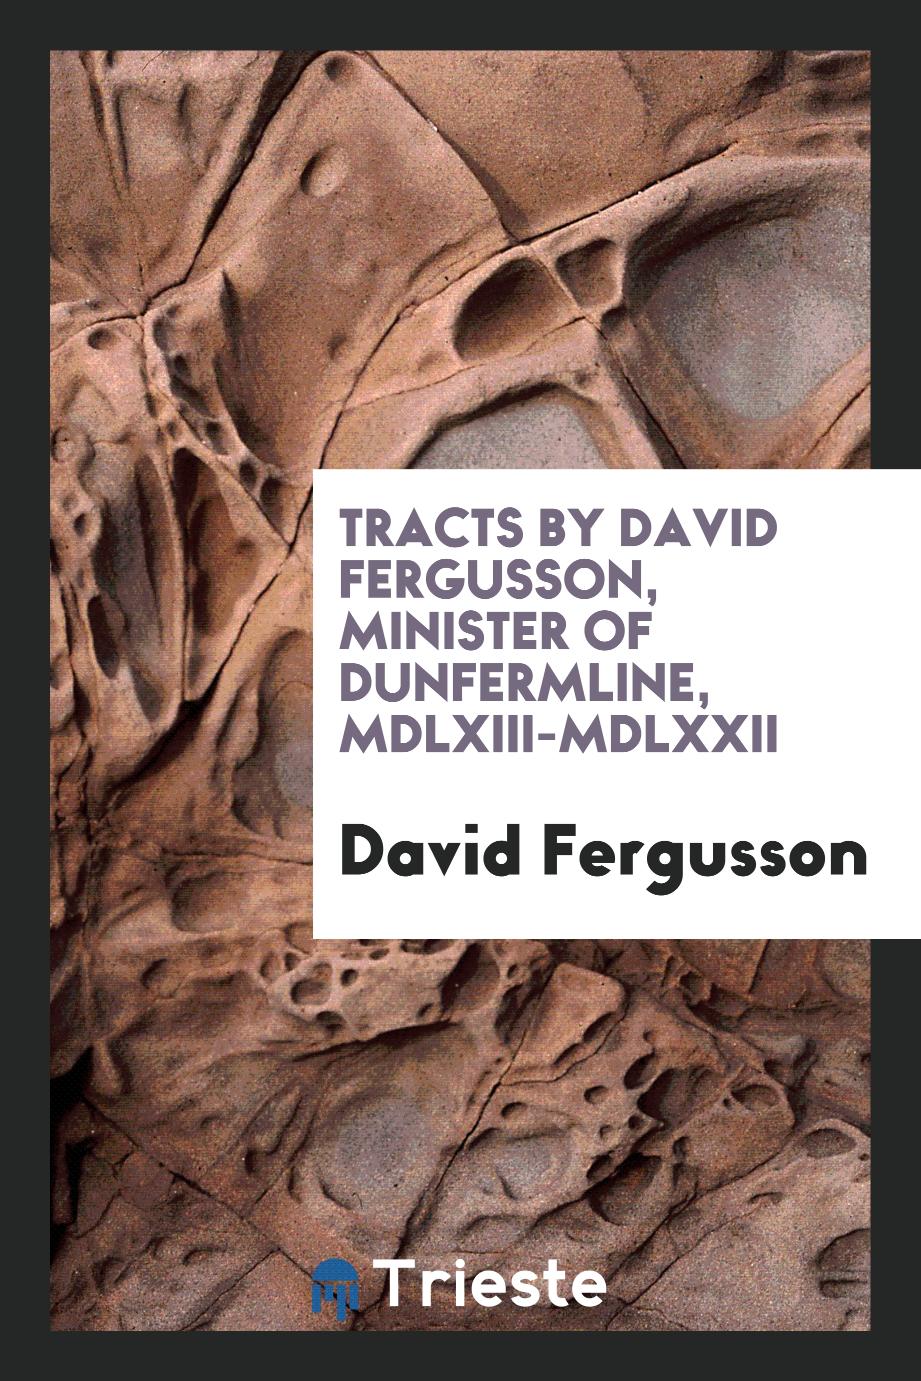 Tracts by David Fergusson, Minister of Dunfermline, MDLXIII-MDLXXII